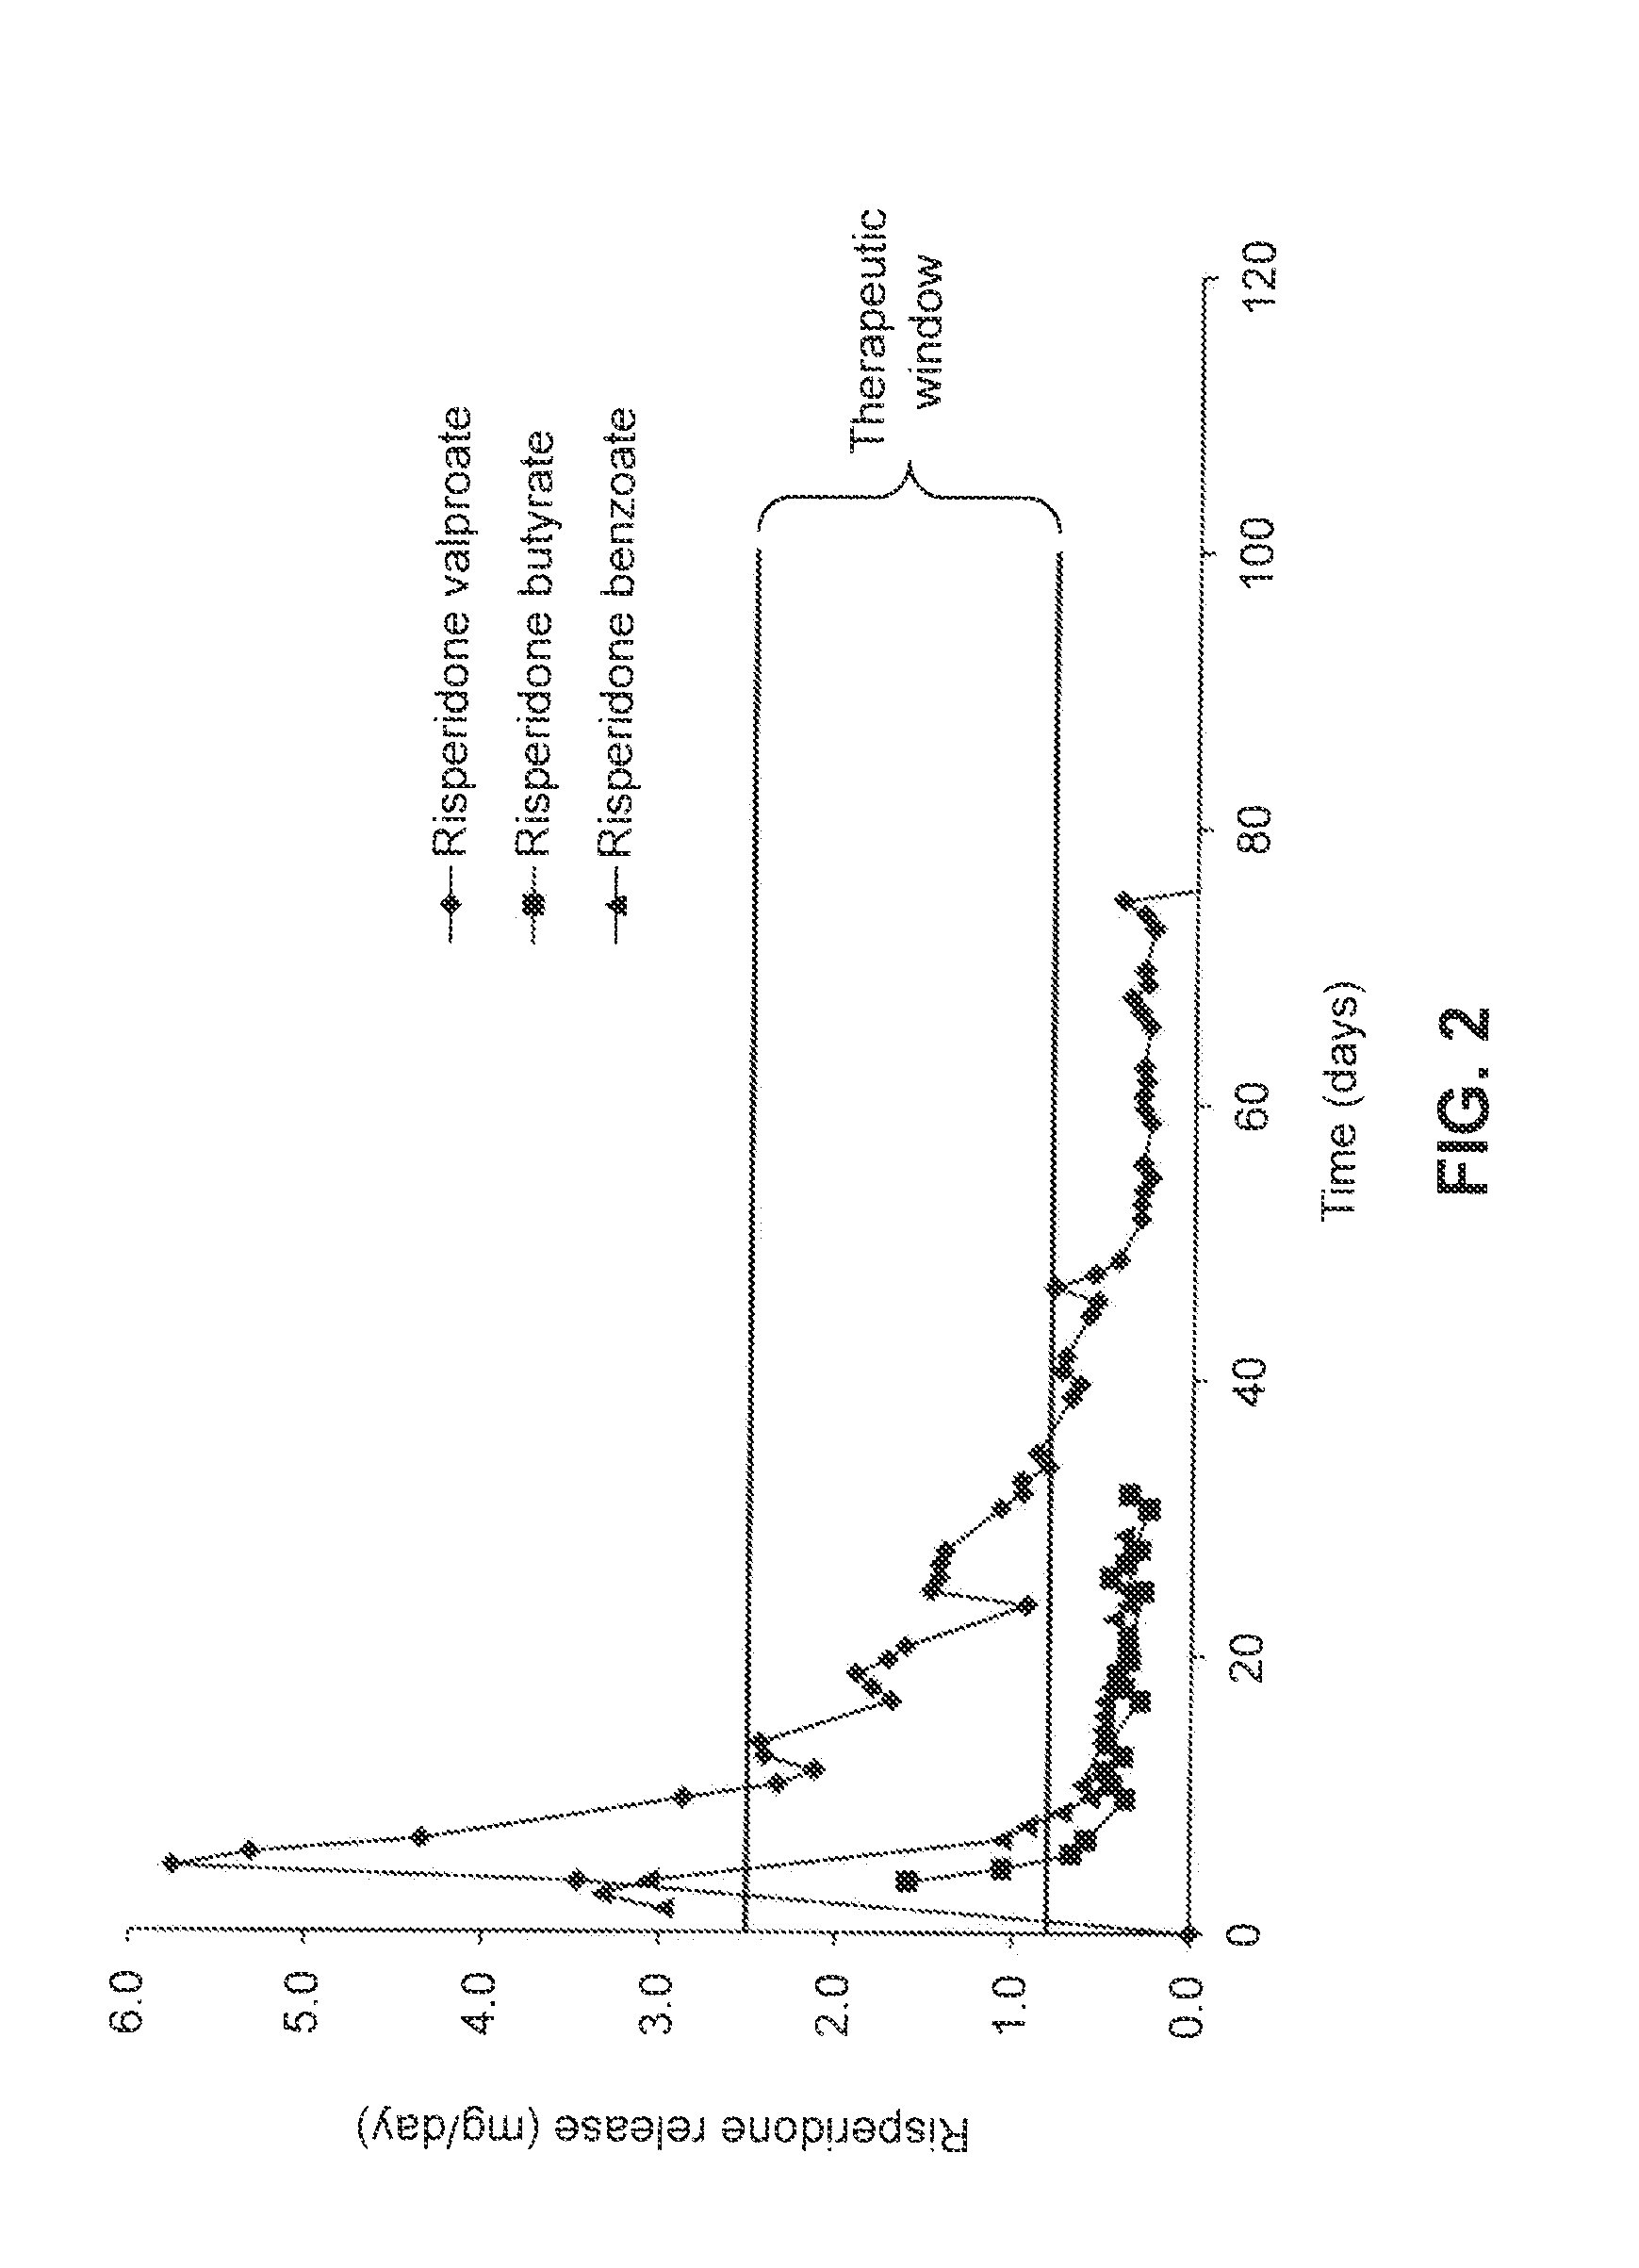 Device and method for sustained release of antipsychotic medications